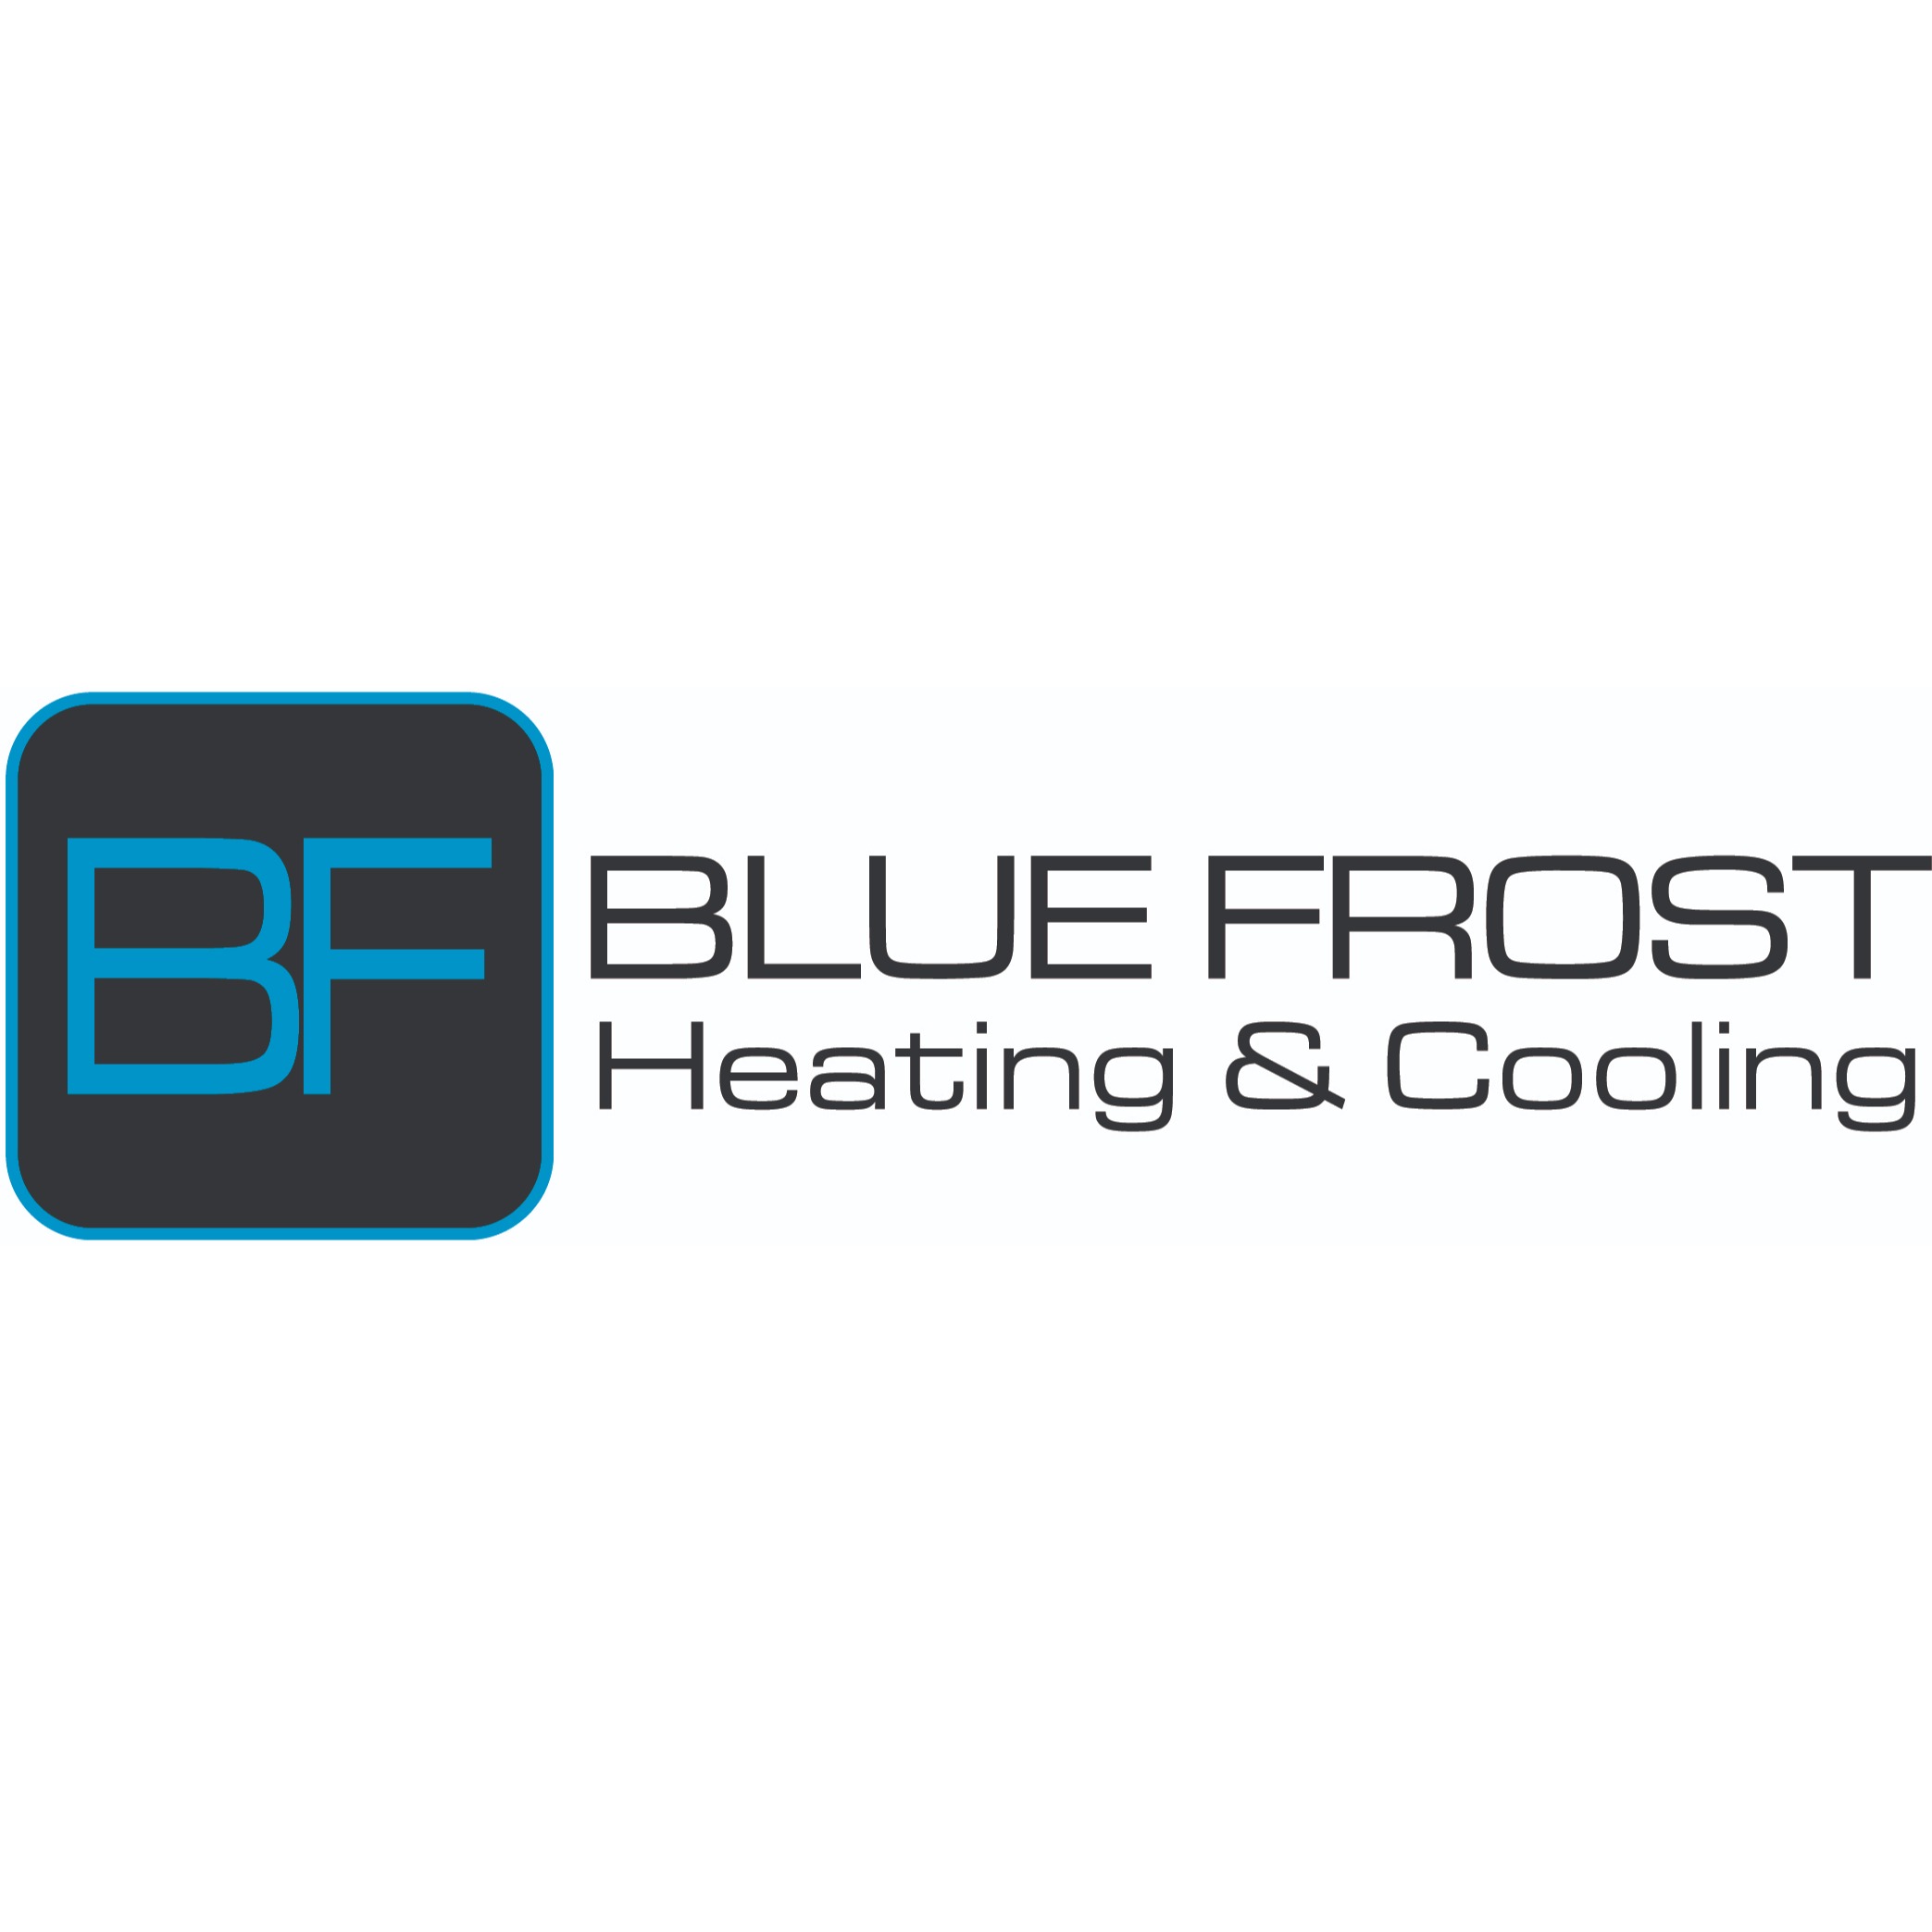 Blue Frost Heating & Cooling - West Chicago, IL 60185 - (630)283-6731 | ShowMeLocal.com